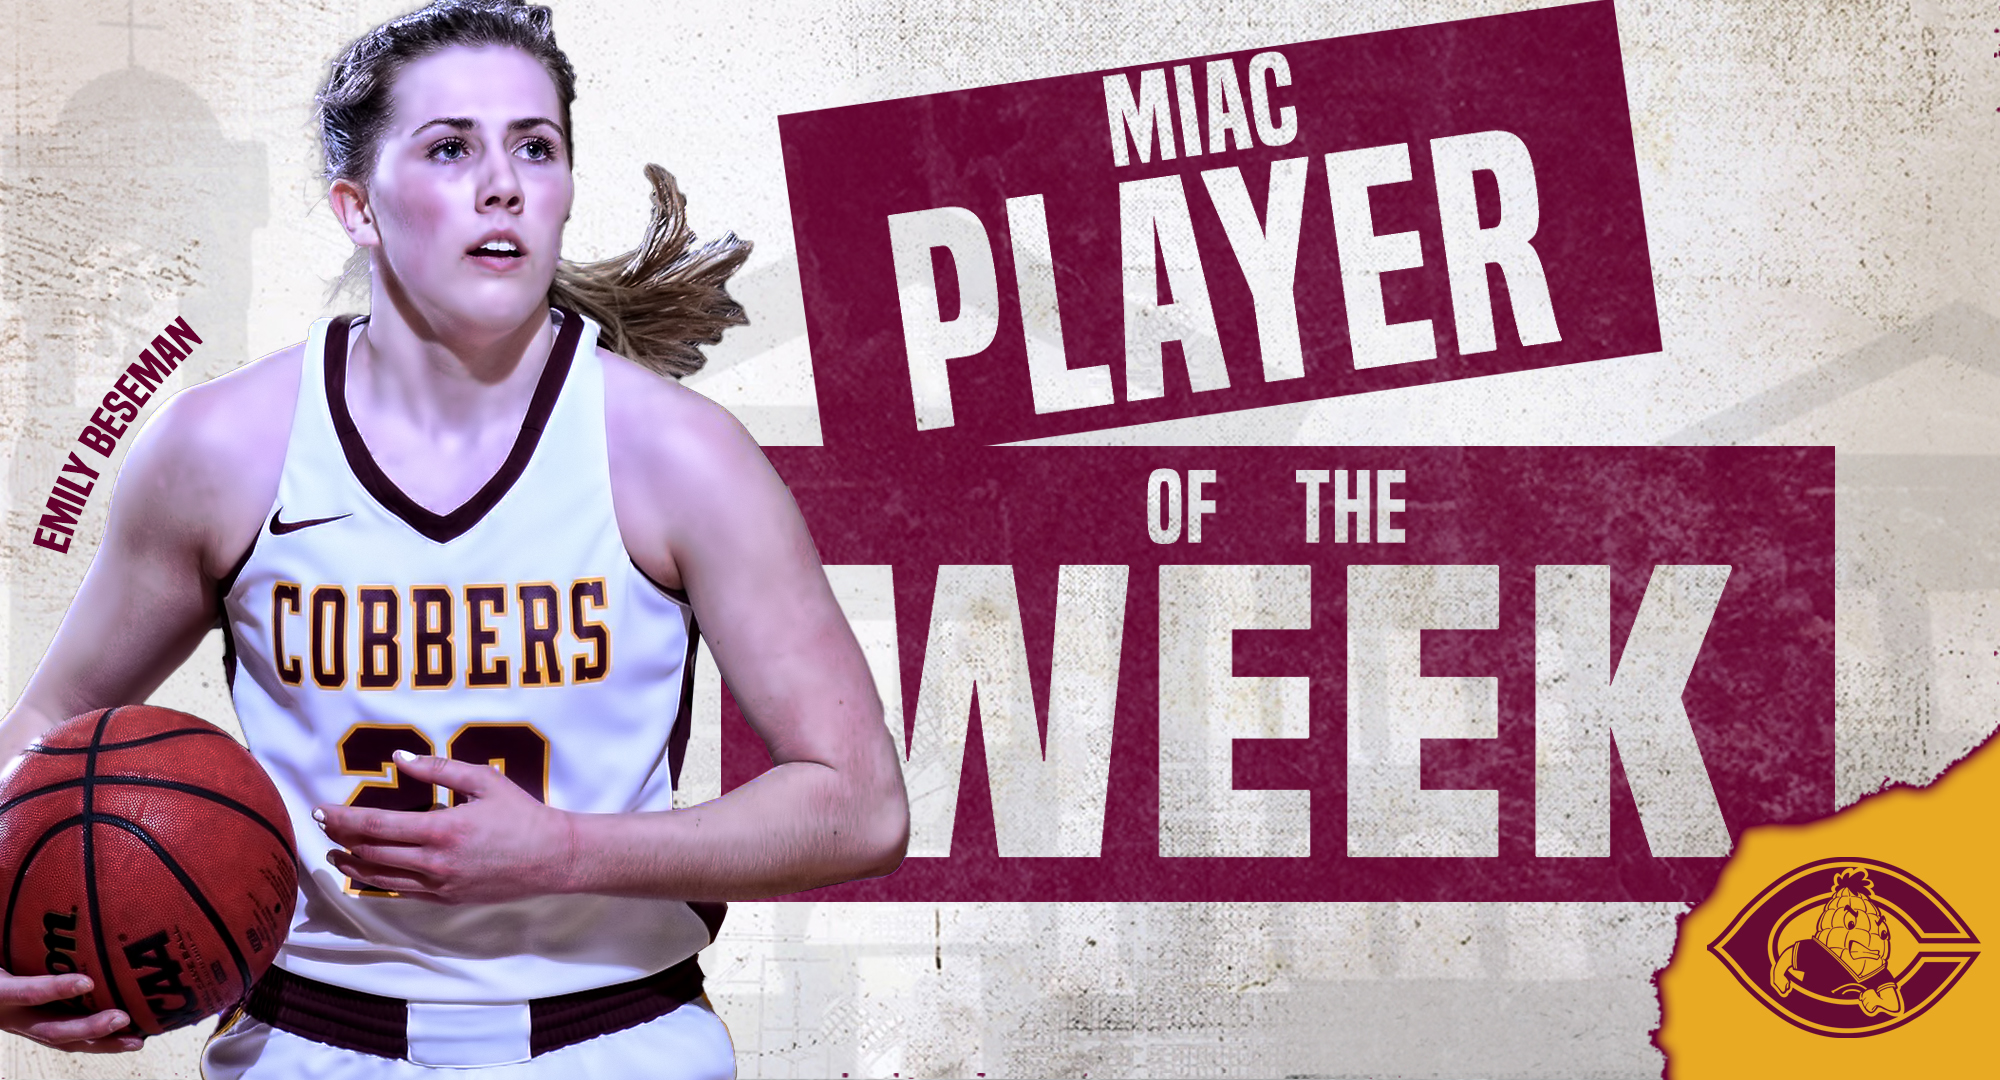 Sophomore guard Emily Beseman was named the MIAC Player of the Week after her 22-point, 8-rebound performance against St. Benedict on Friday.